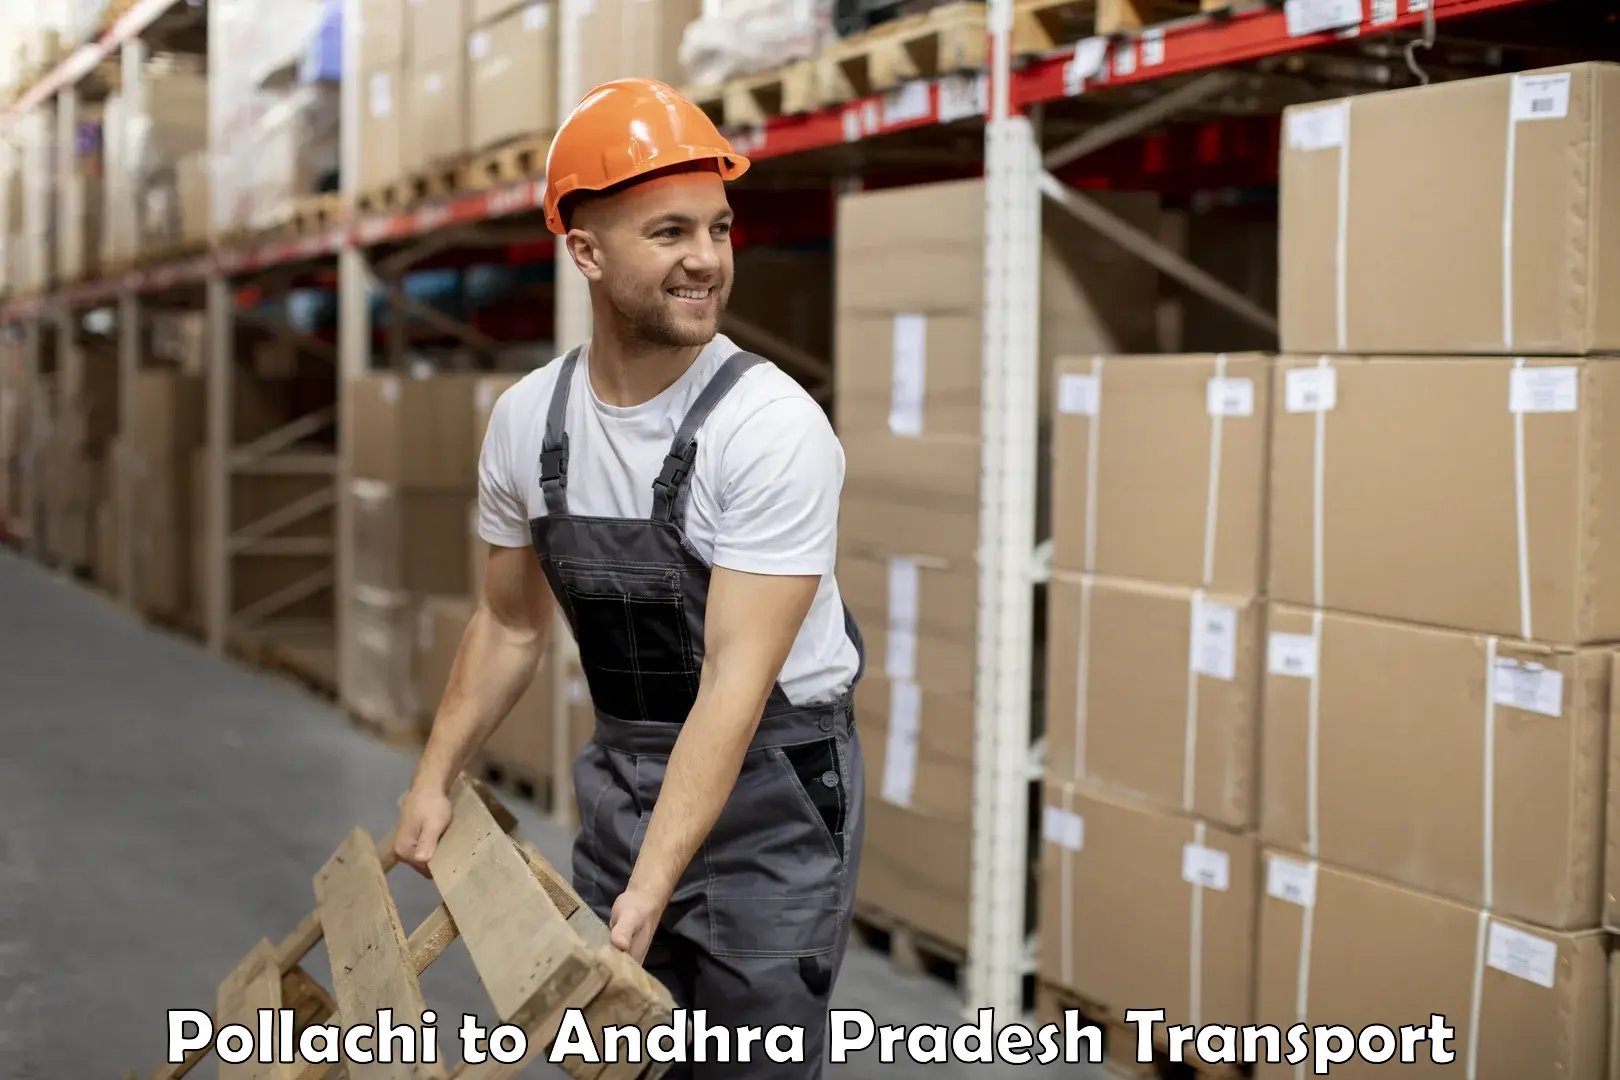 Goods delivery service Pollachi to Bhimadole